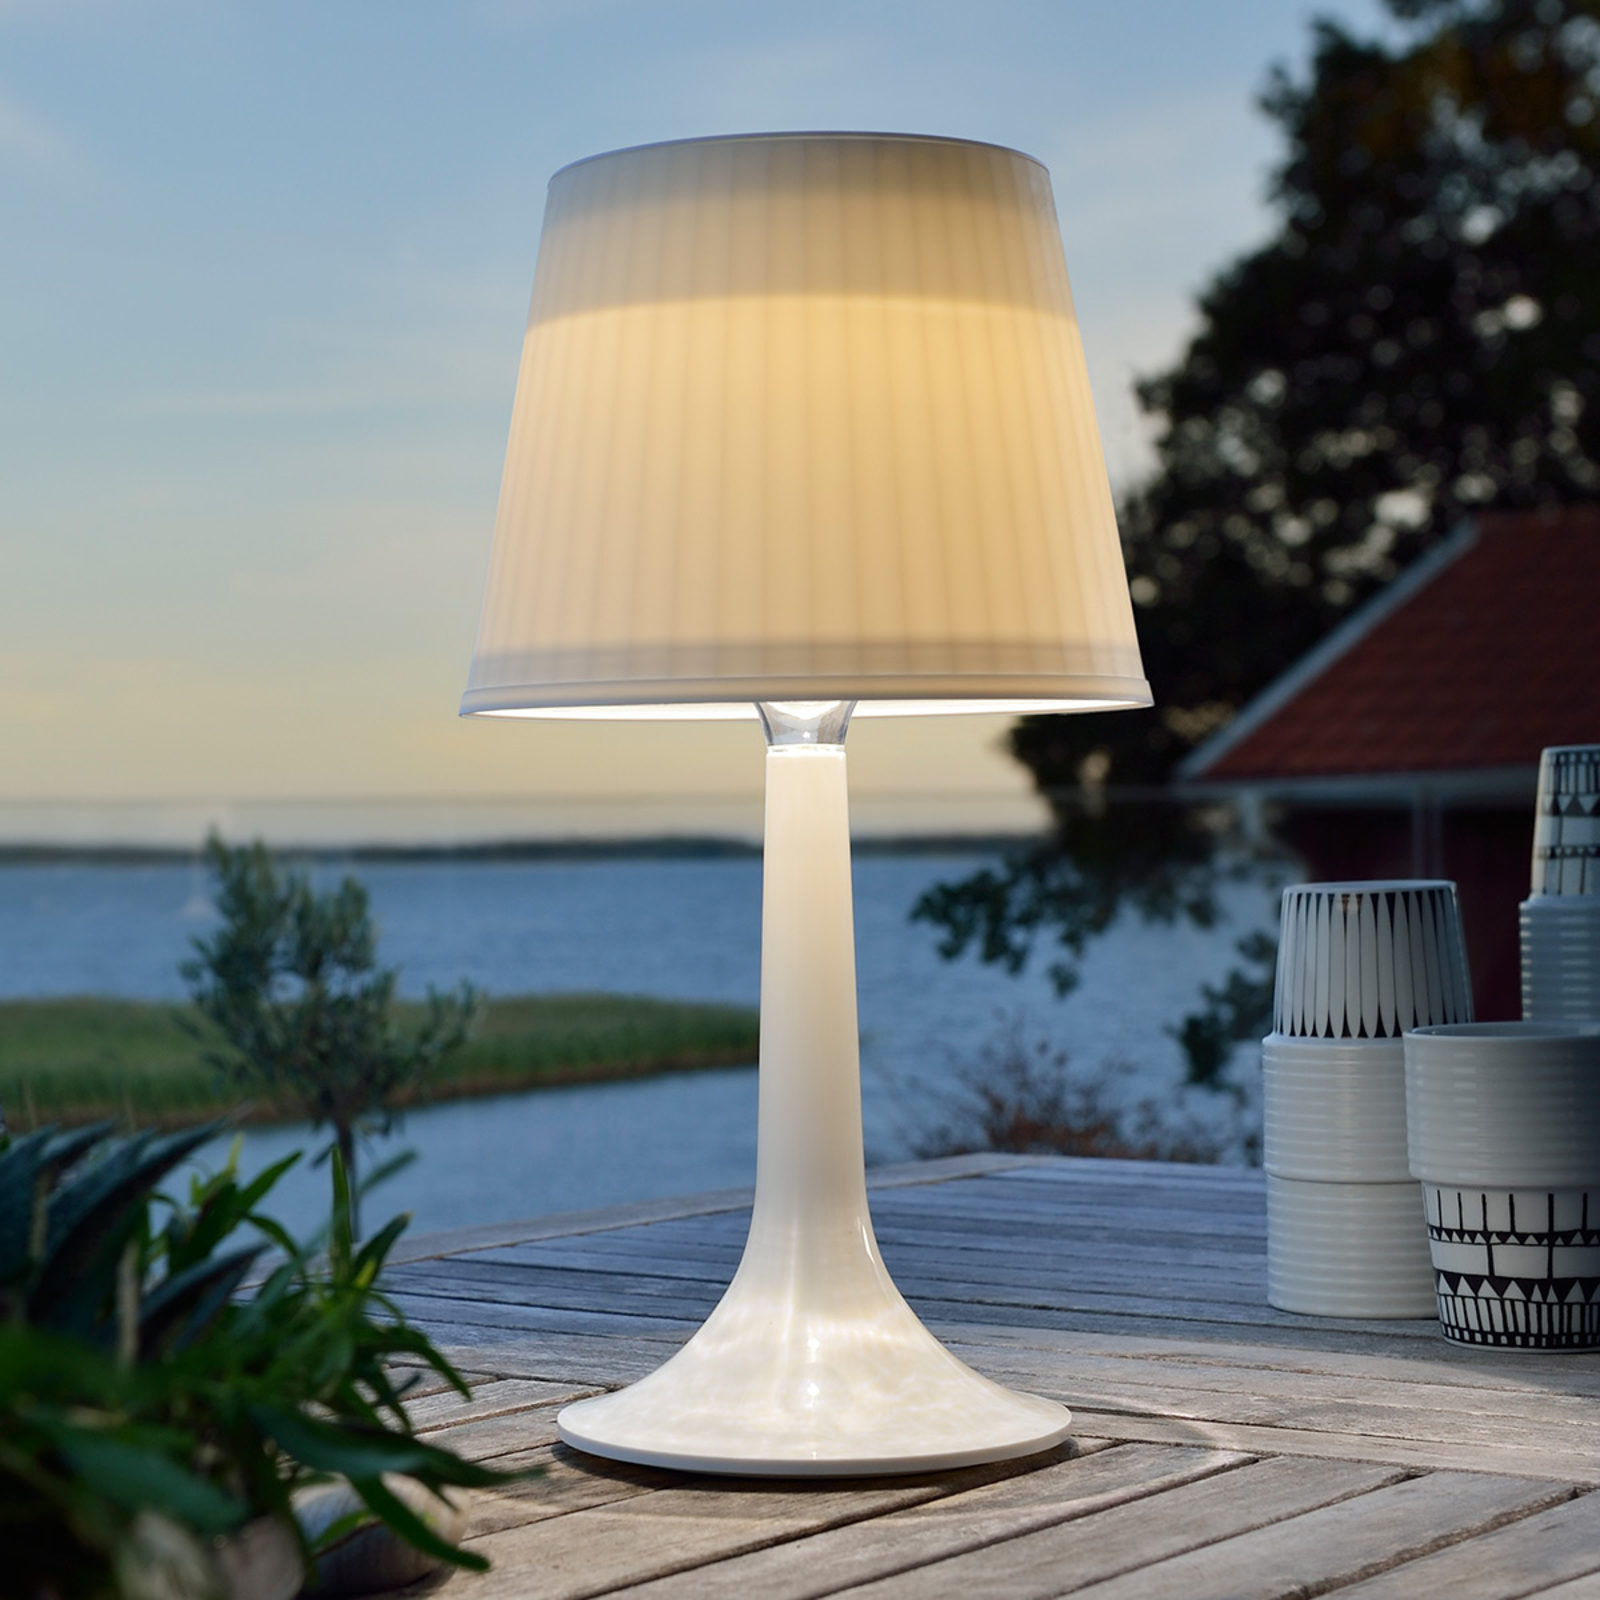 White Assisi Sitra LED solar table lamp